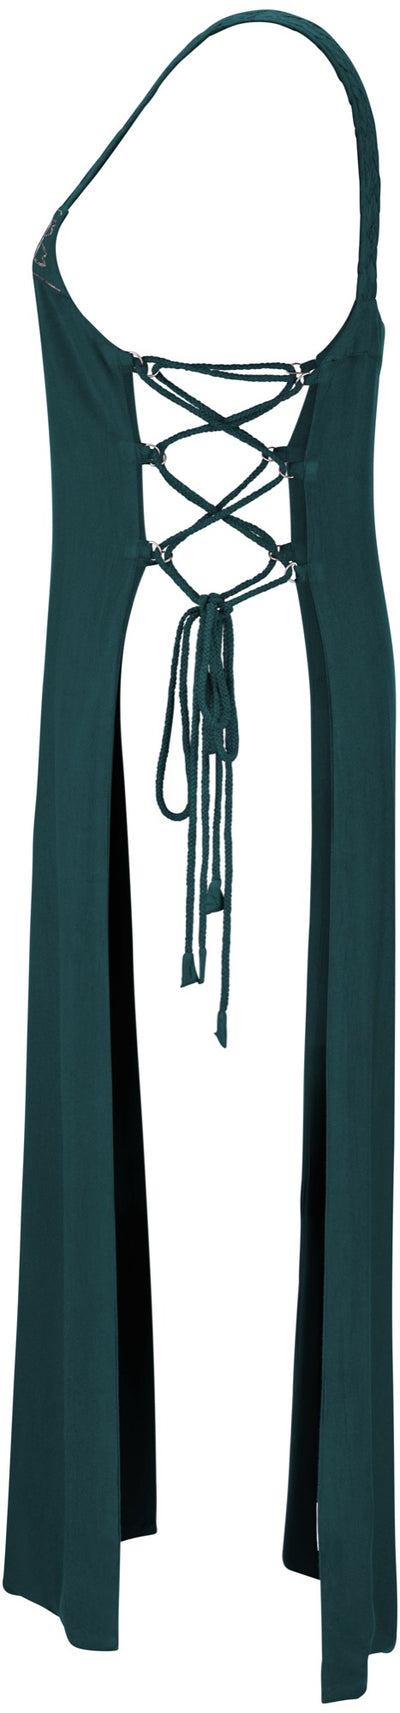 Ingrid Apron Limited Edition Teal Peacock